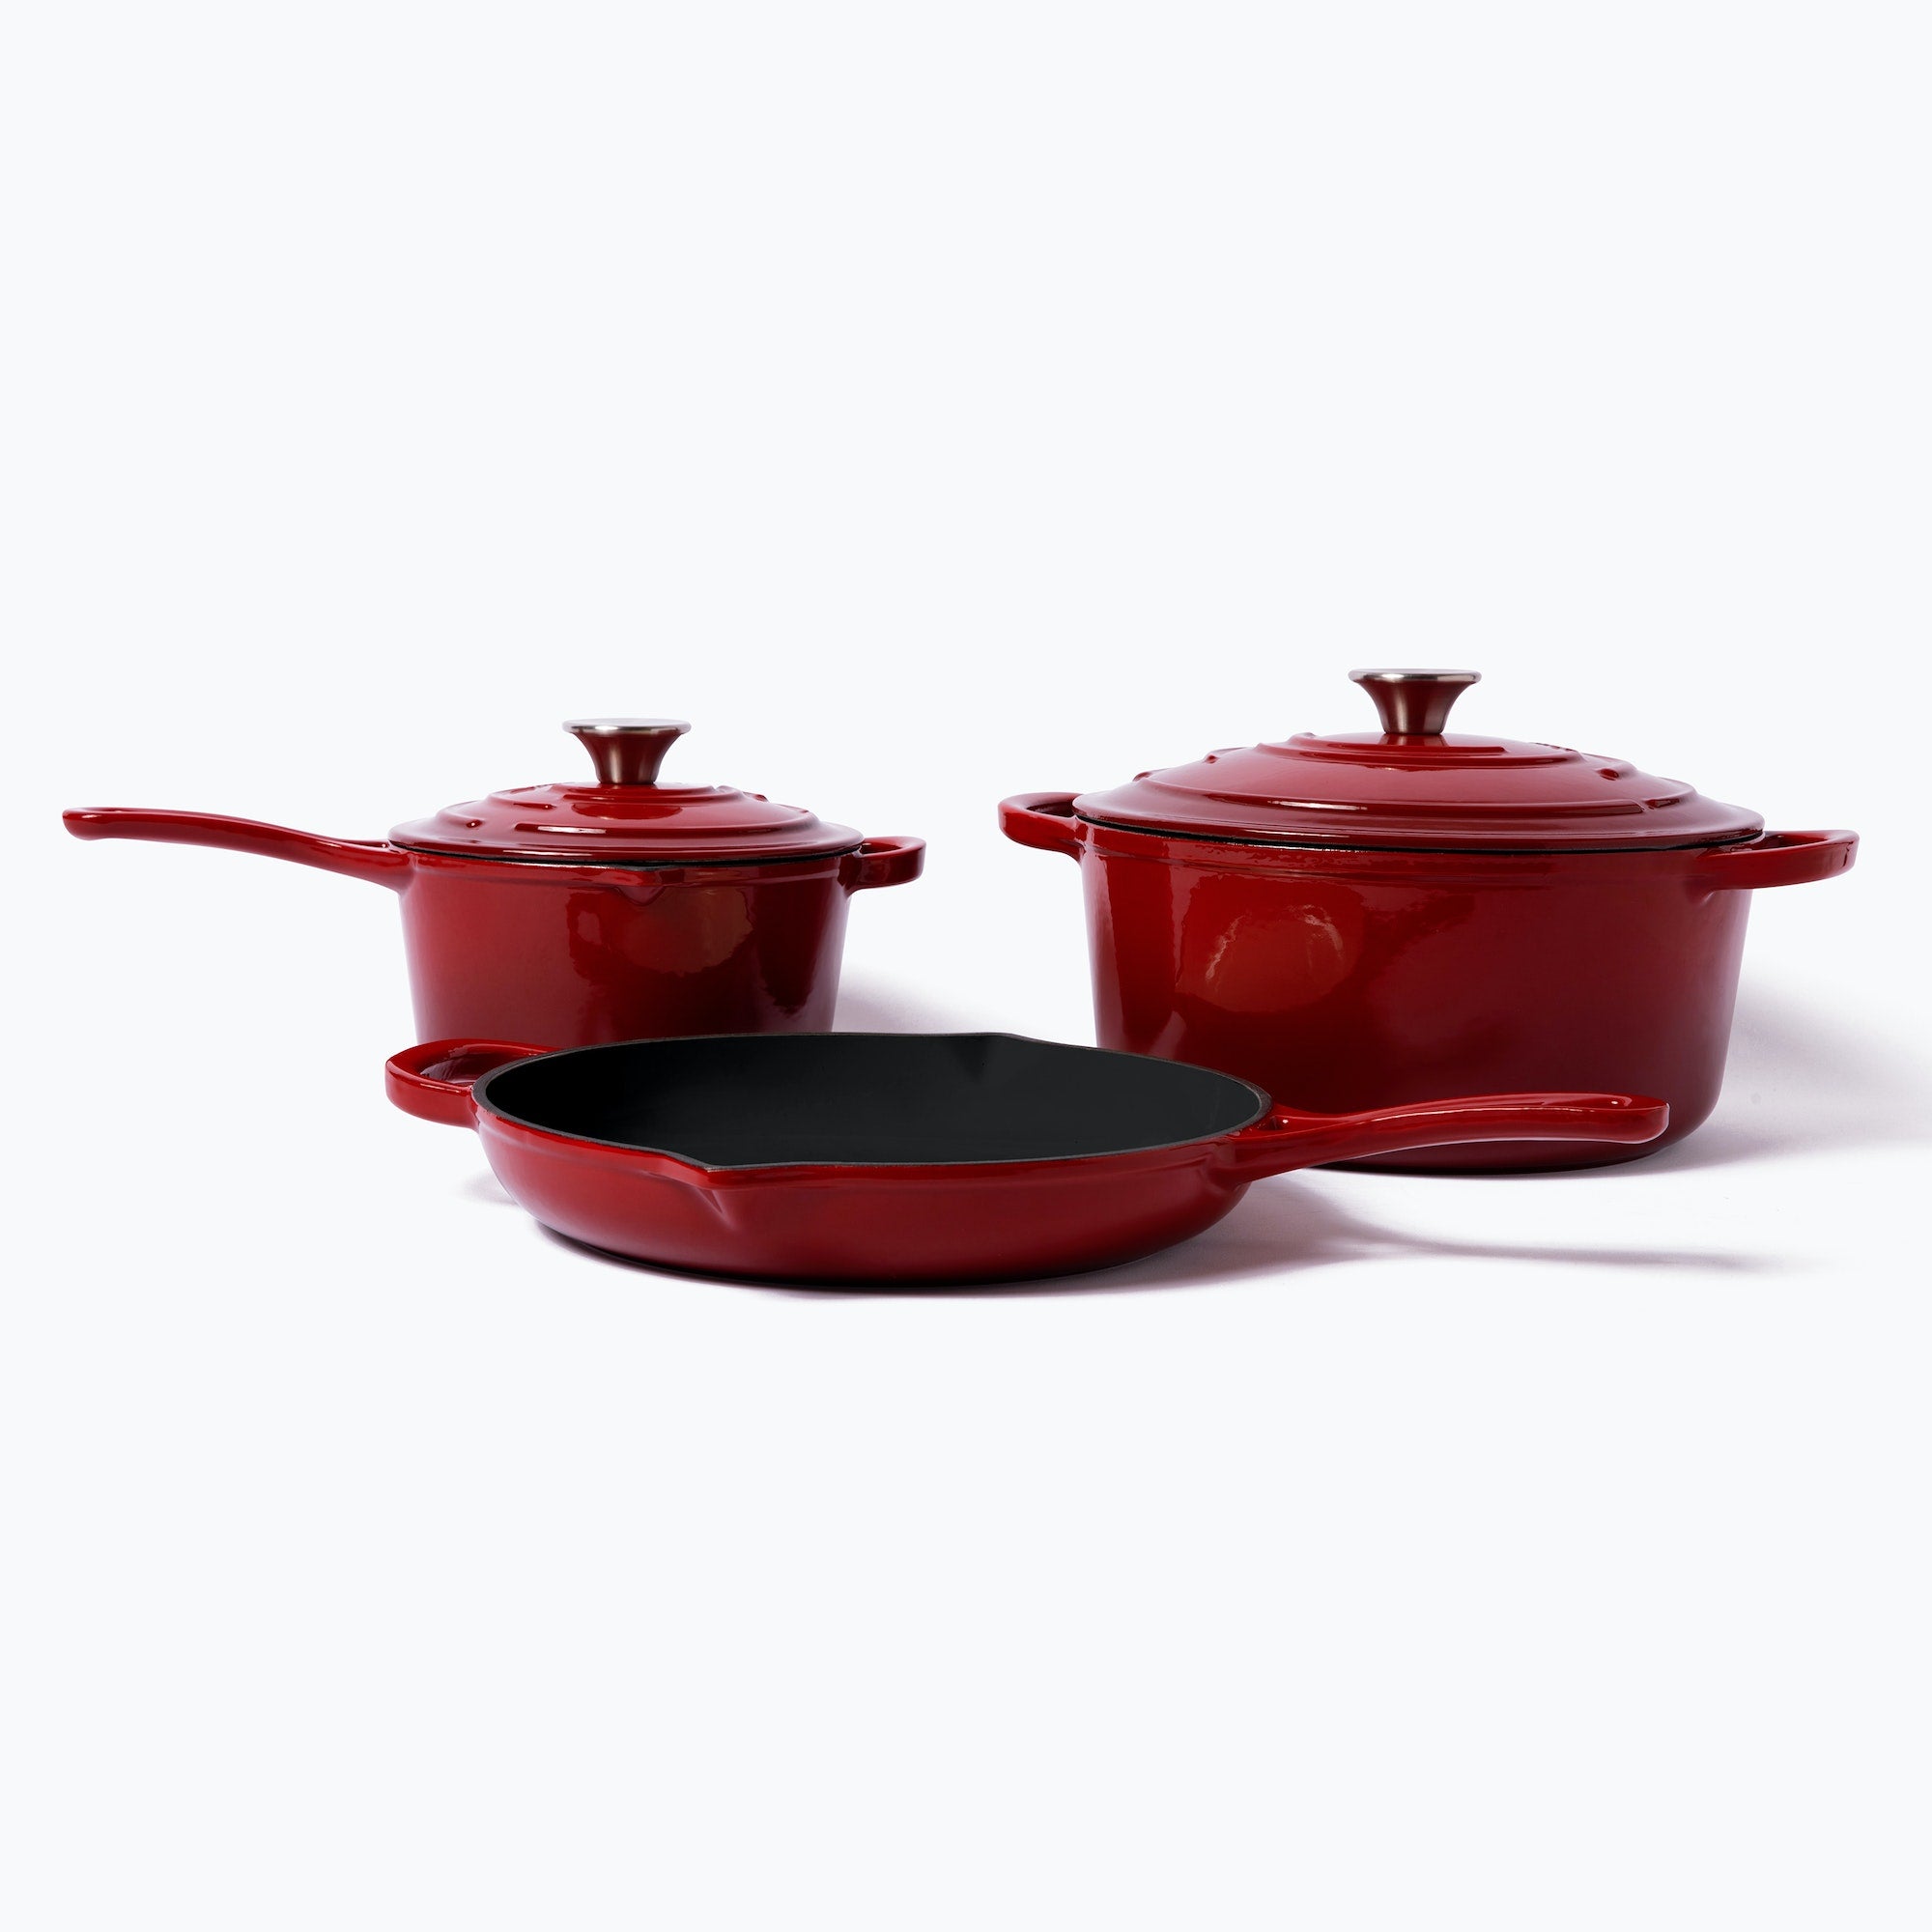 Cookware, Dutch Ovens, Skillets, Sets, Braisers, and more Shop